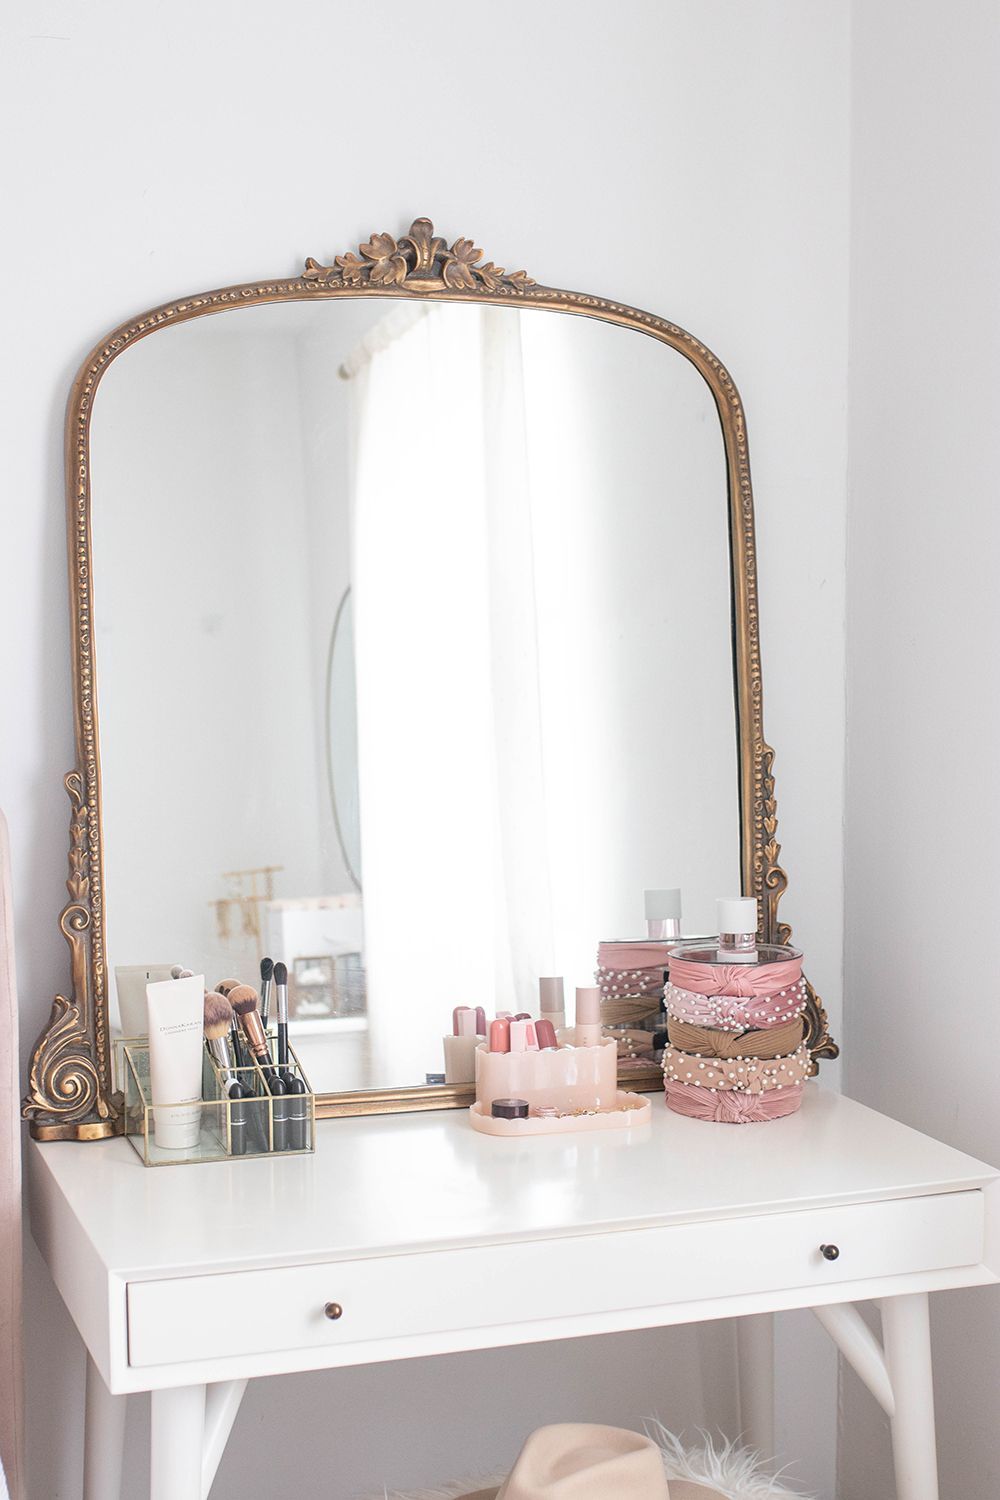 Blush and Gold Bedroom - Money Can Buy Lipstick - Blush and Gold Bedroom - Money Can Buy Lipstick -   18 vintage beauty Room ideas